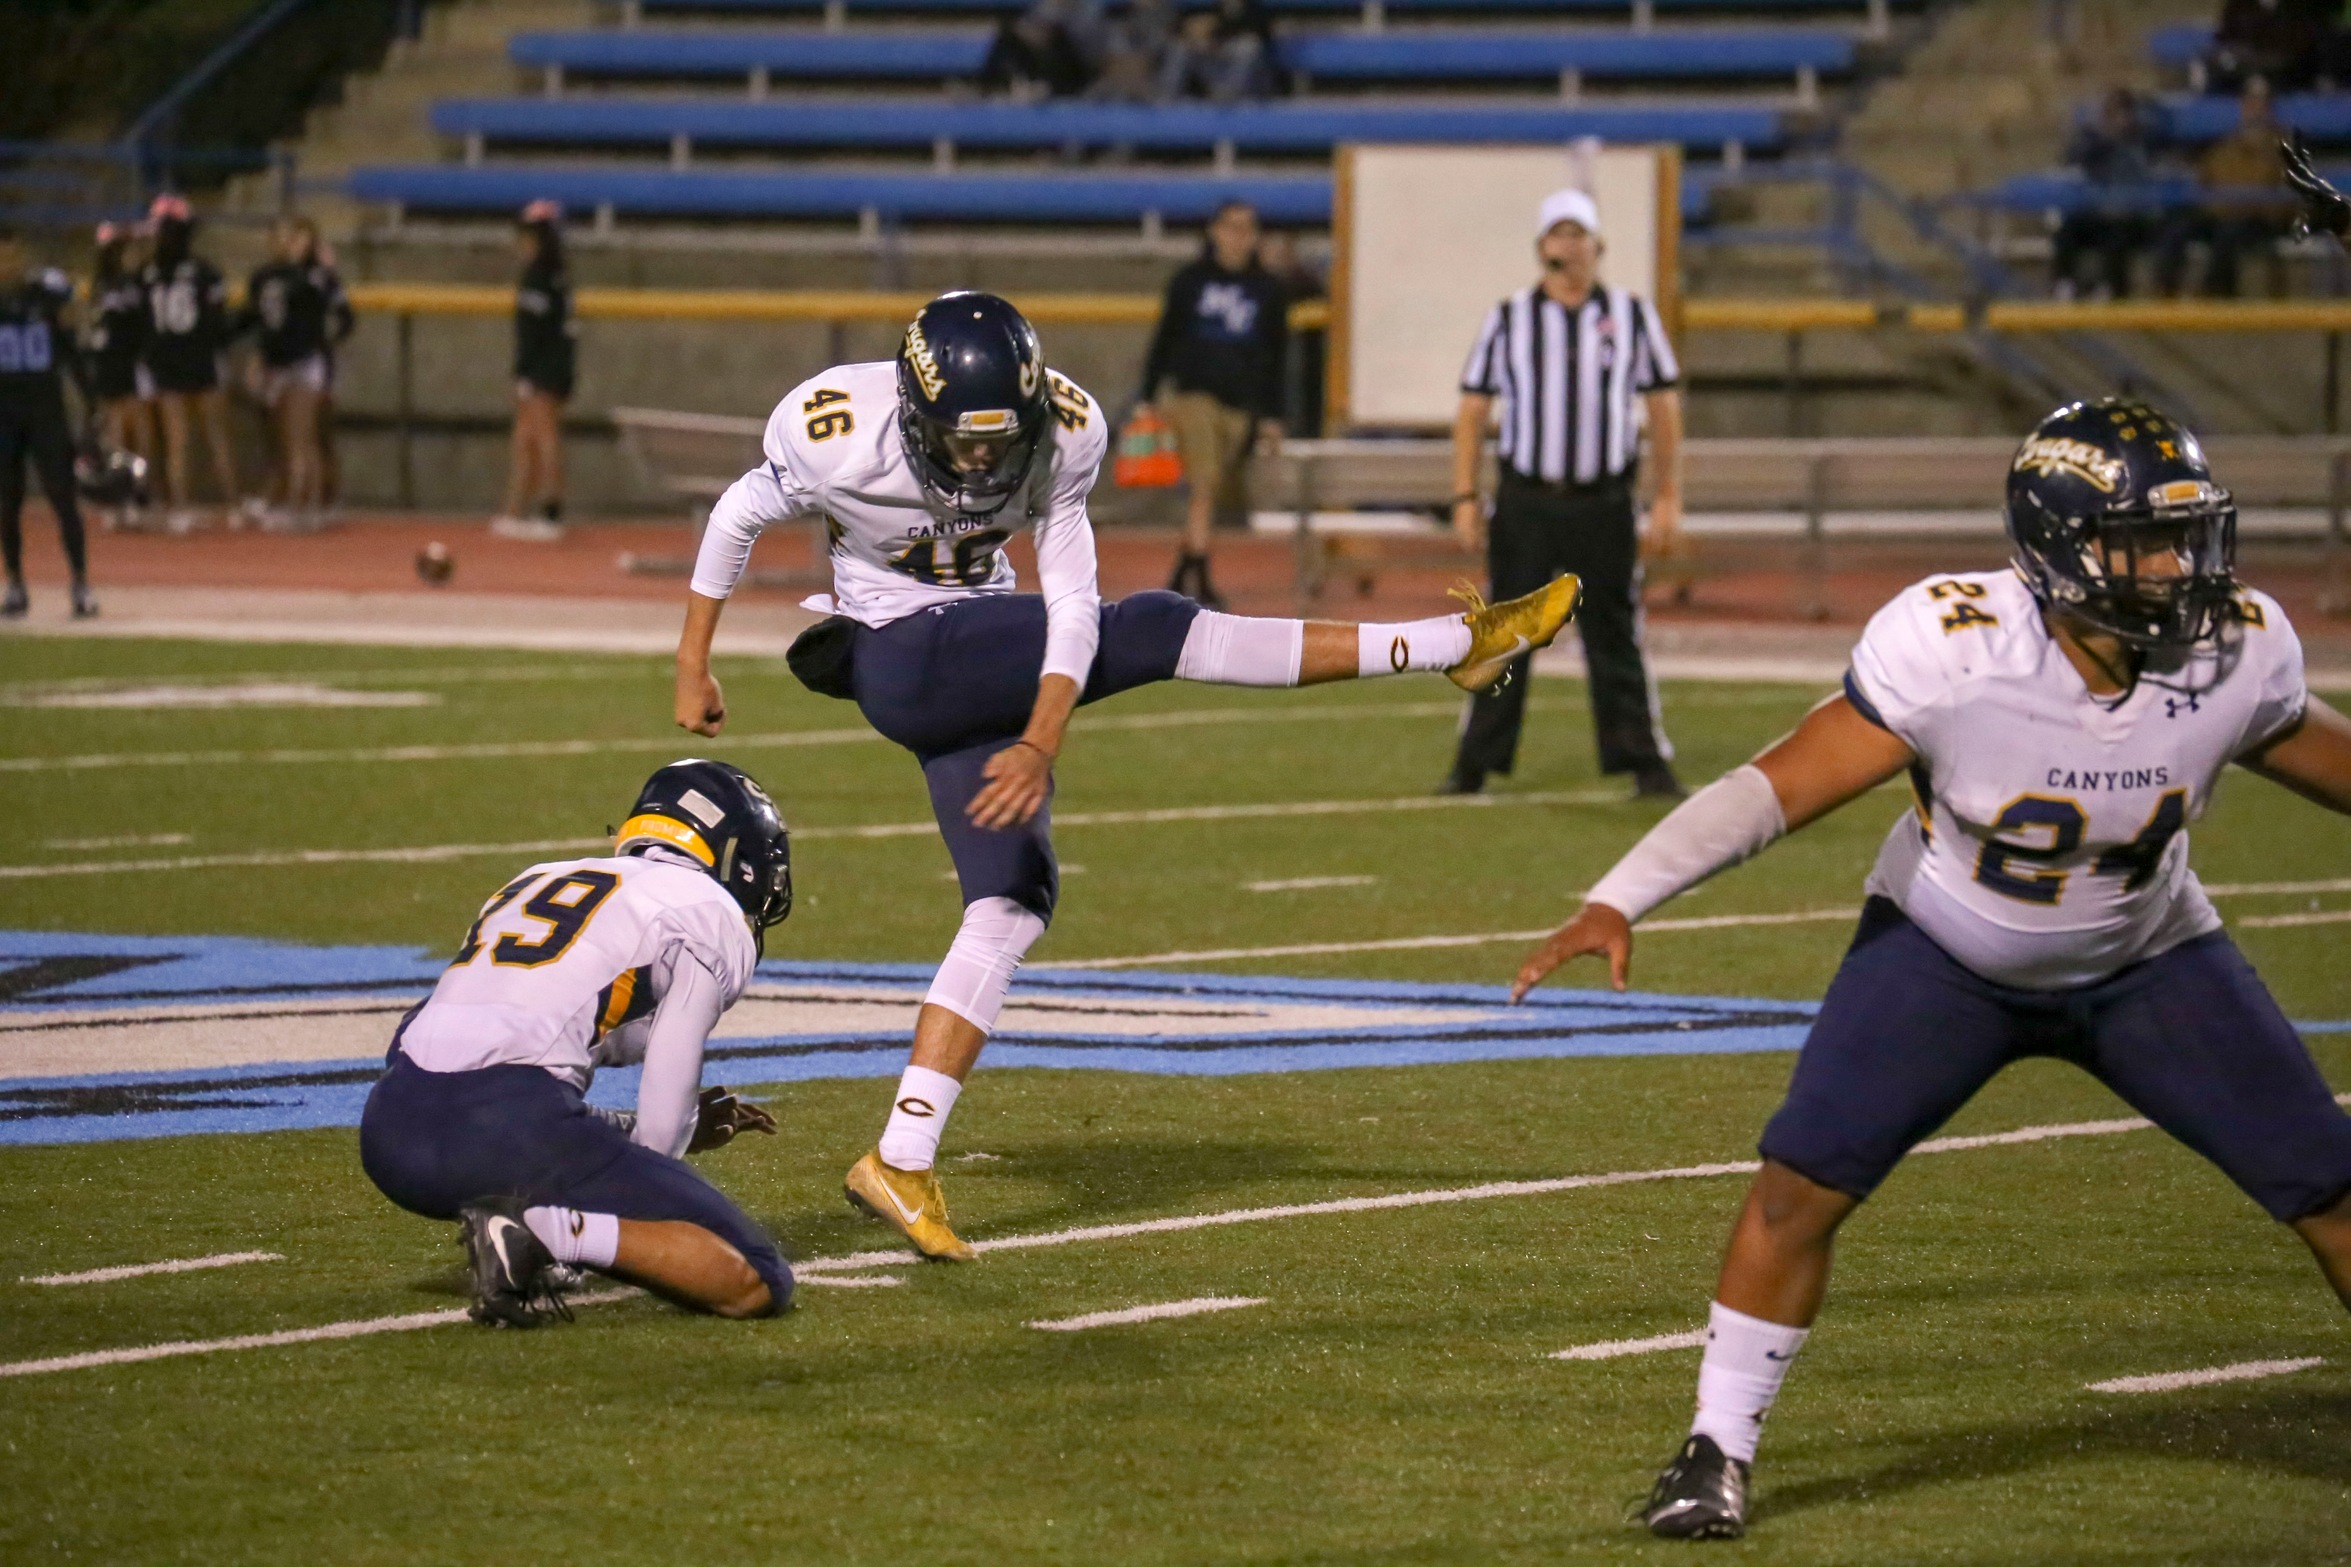 Stock image of College of the Canyons football student-athlete Tanner Brown kicking a football.